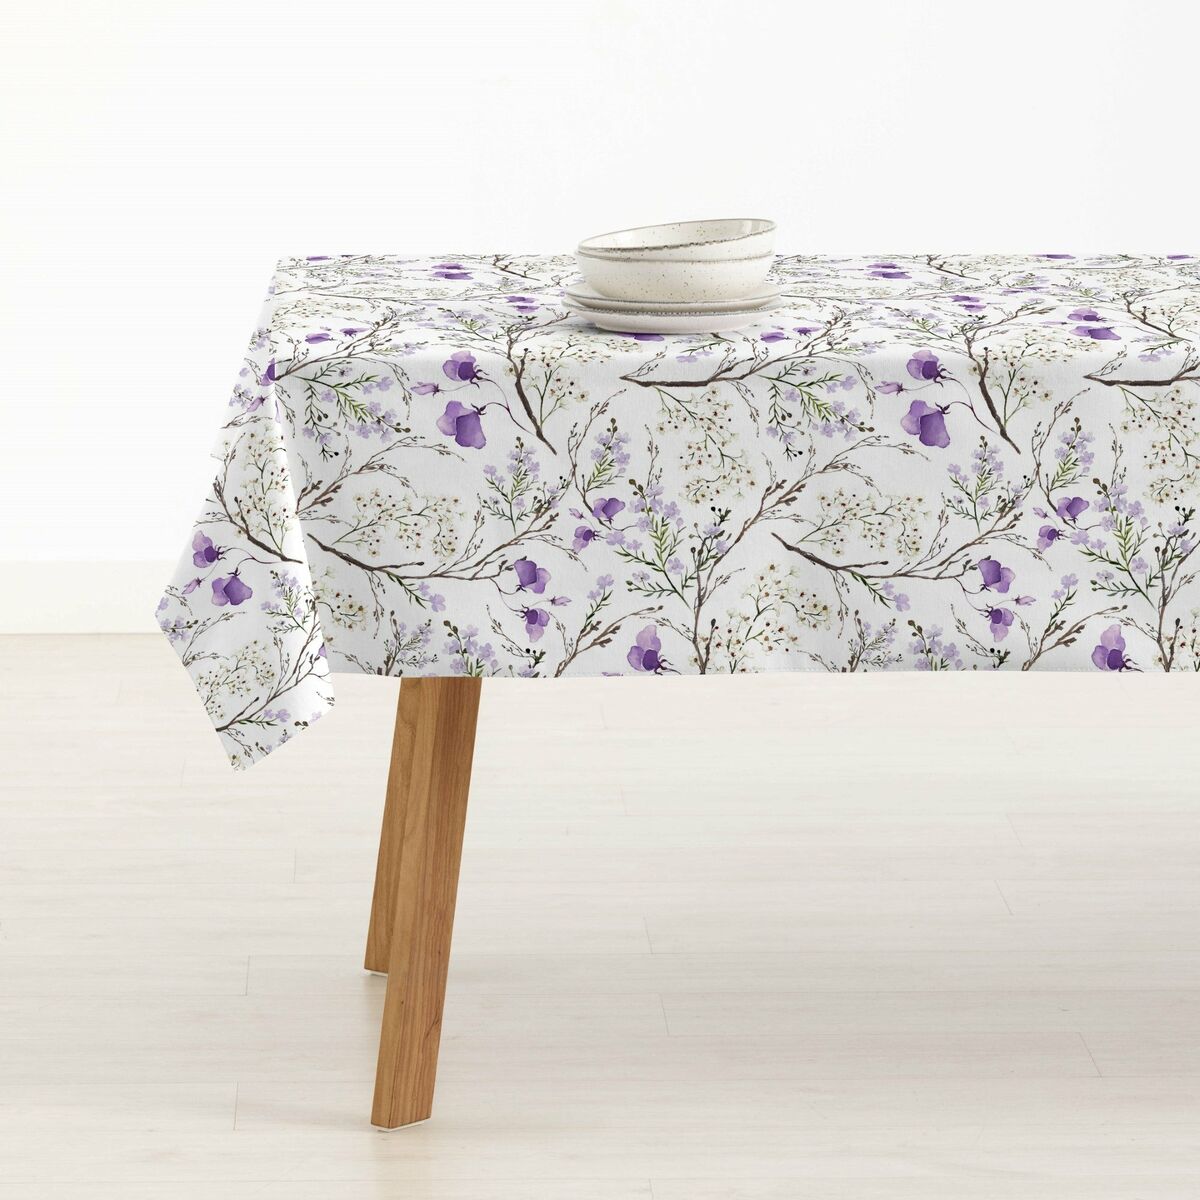 Stain-proof tablecloth Belum 0120-374 300 x 140 cm